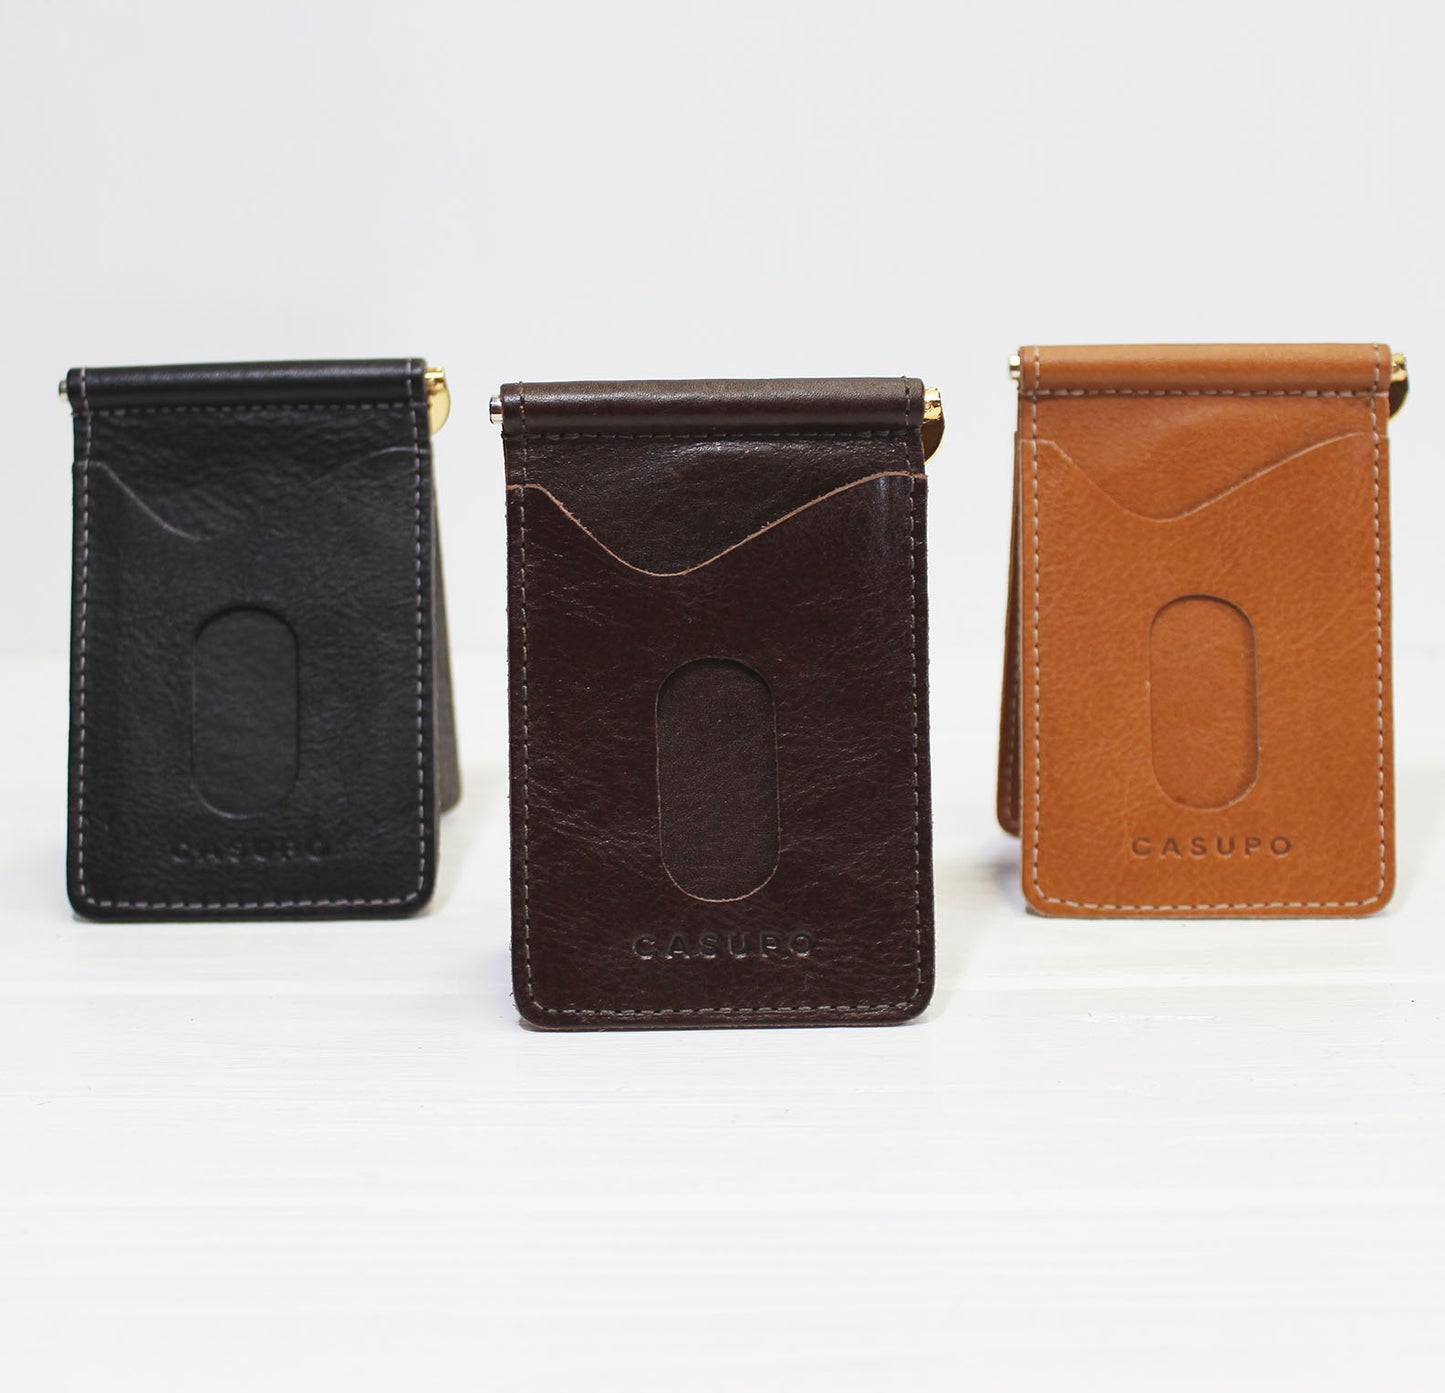 sustainable leather money clip wallet